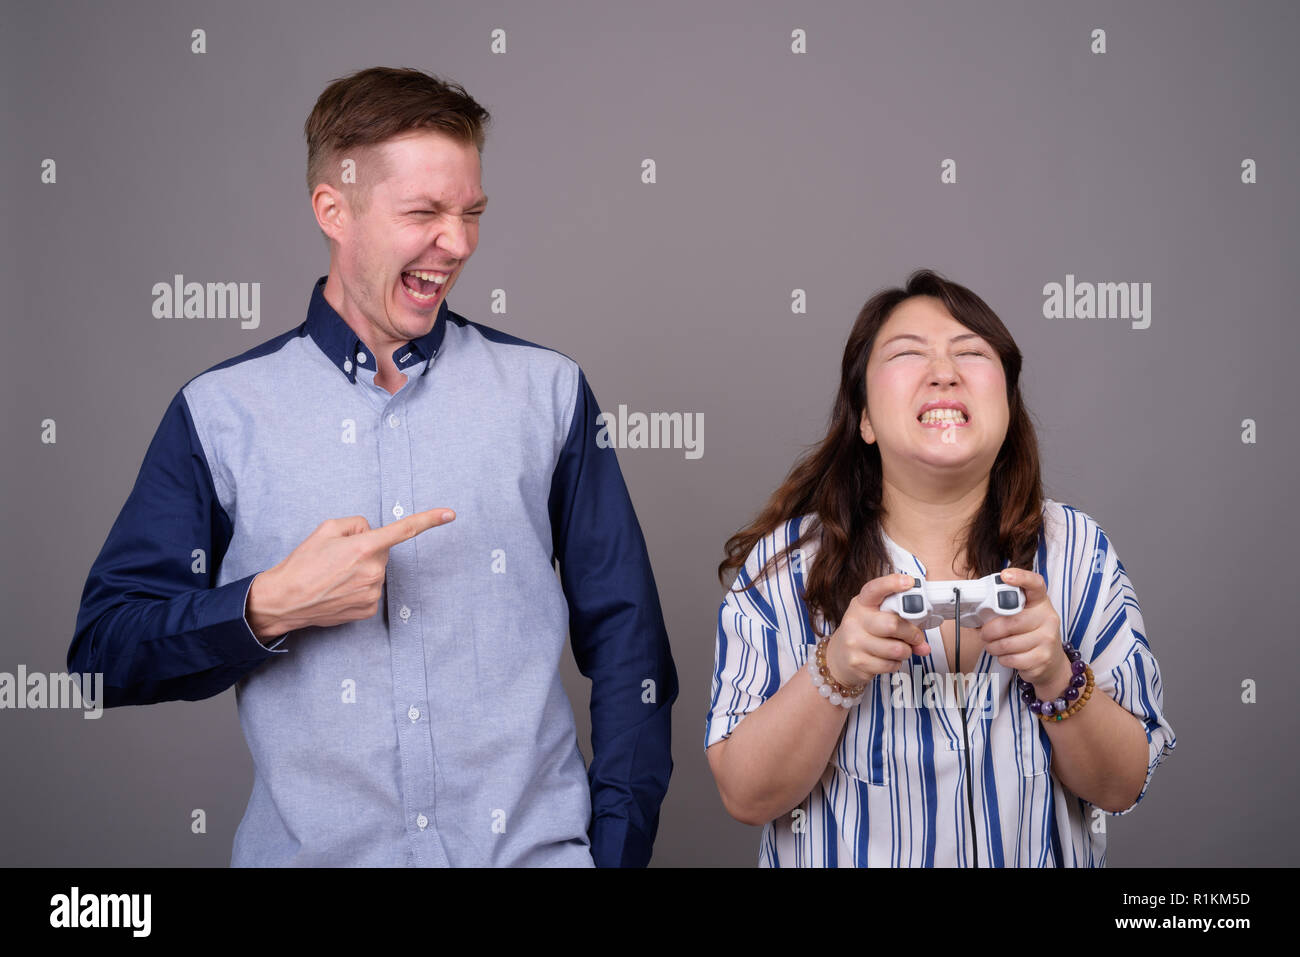 Portrait of multi ethnic diverse couple playing video games Stock Photo